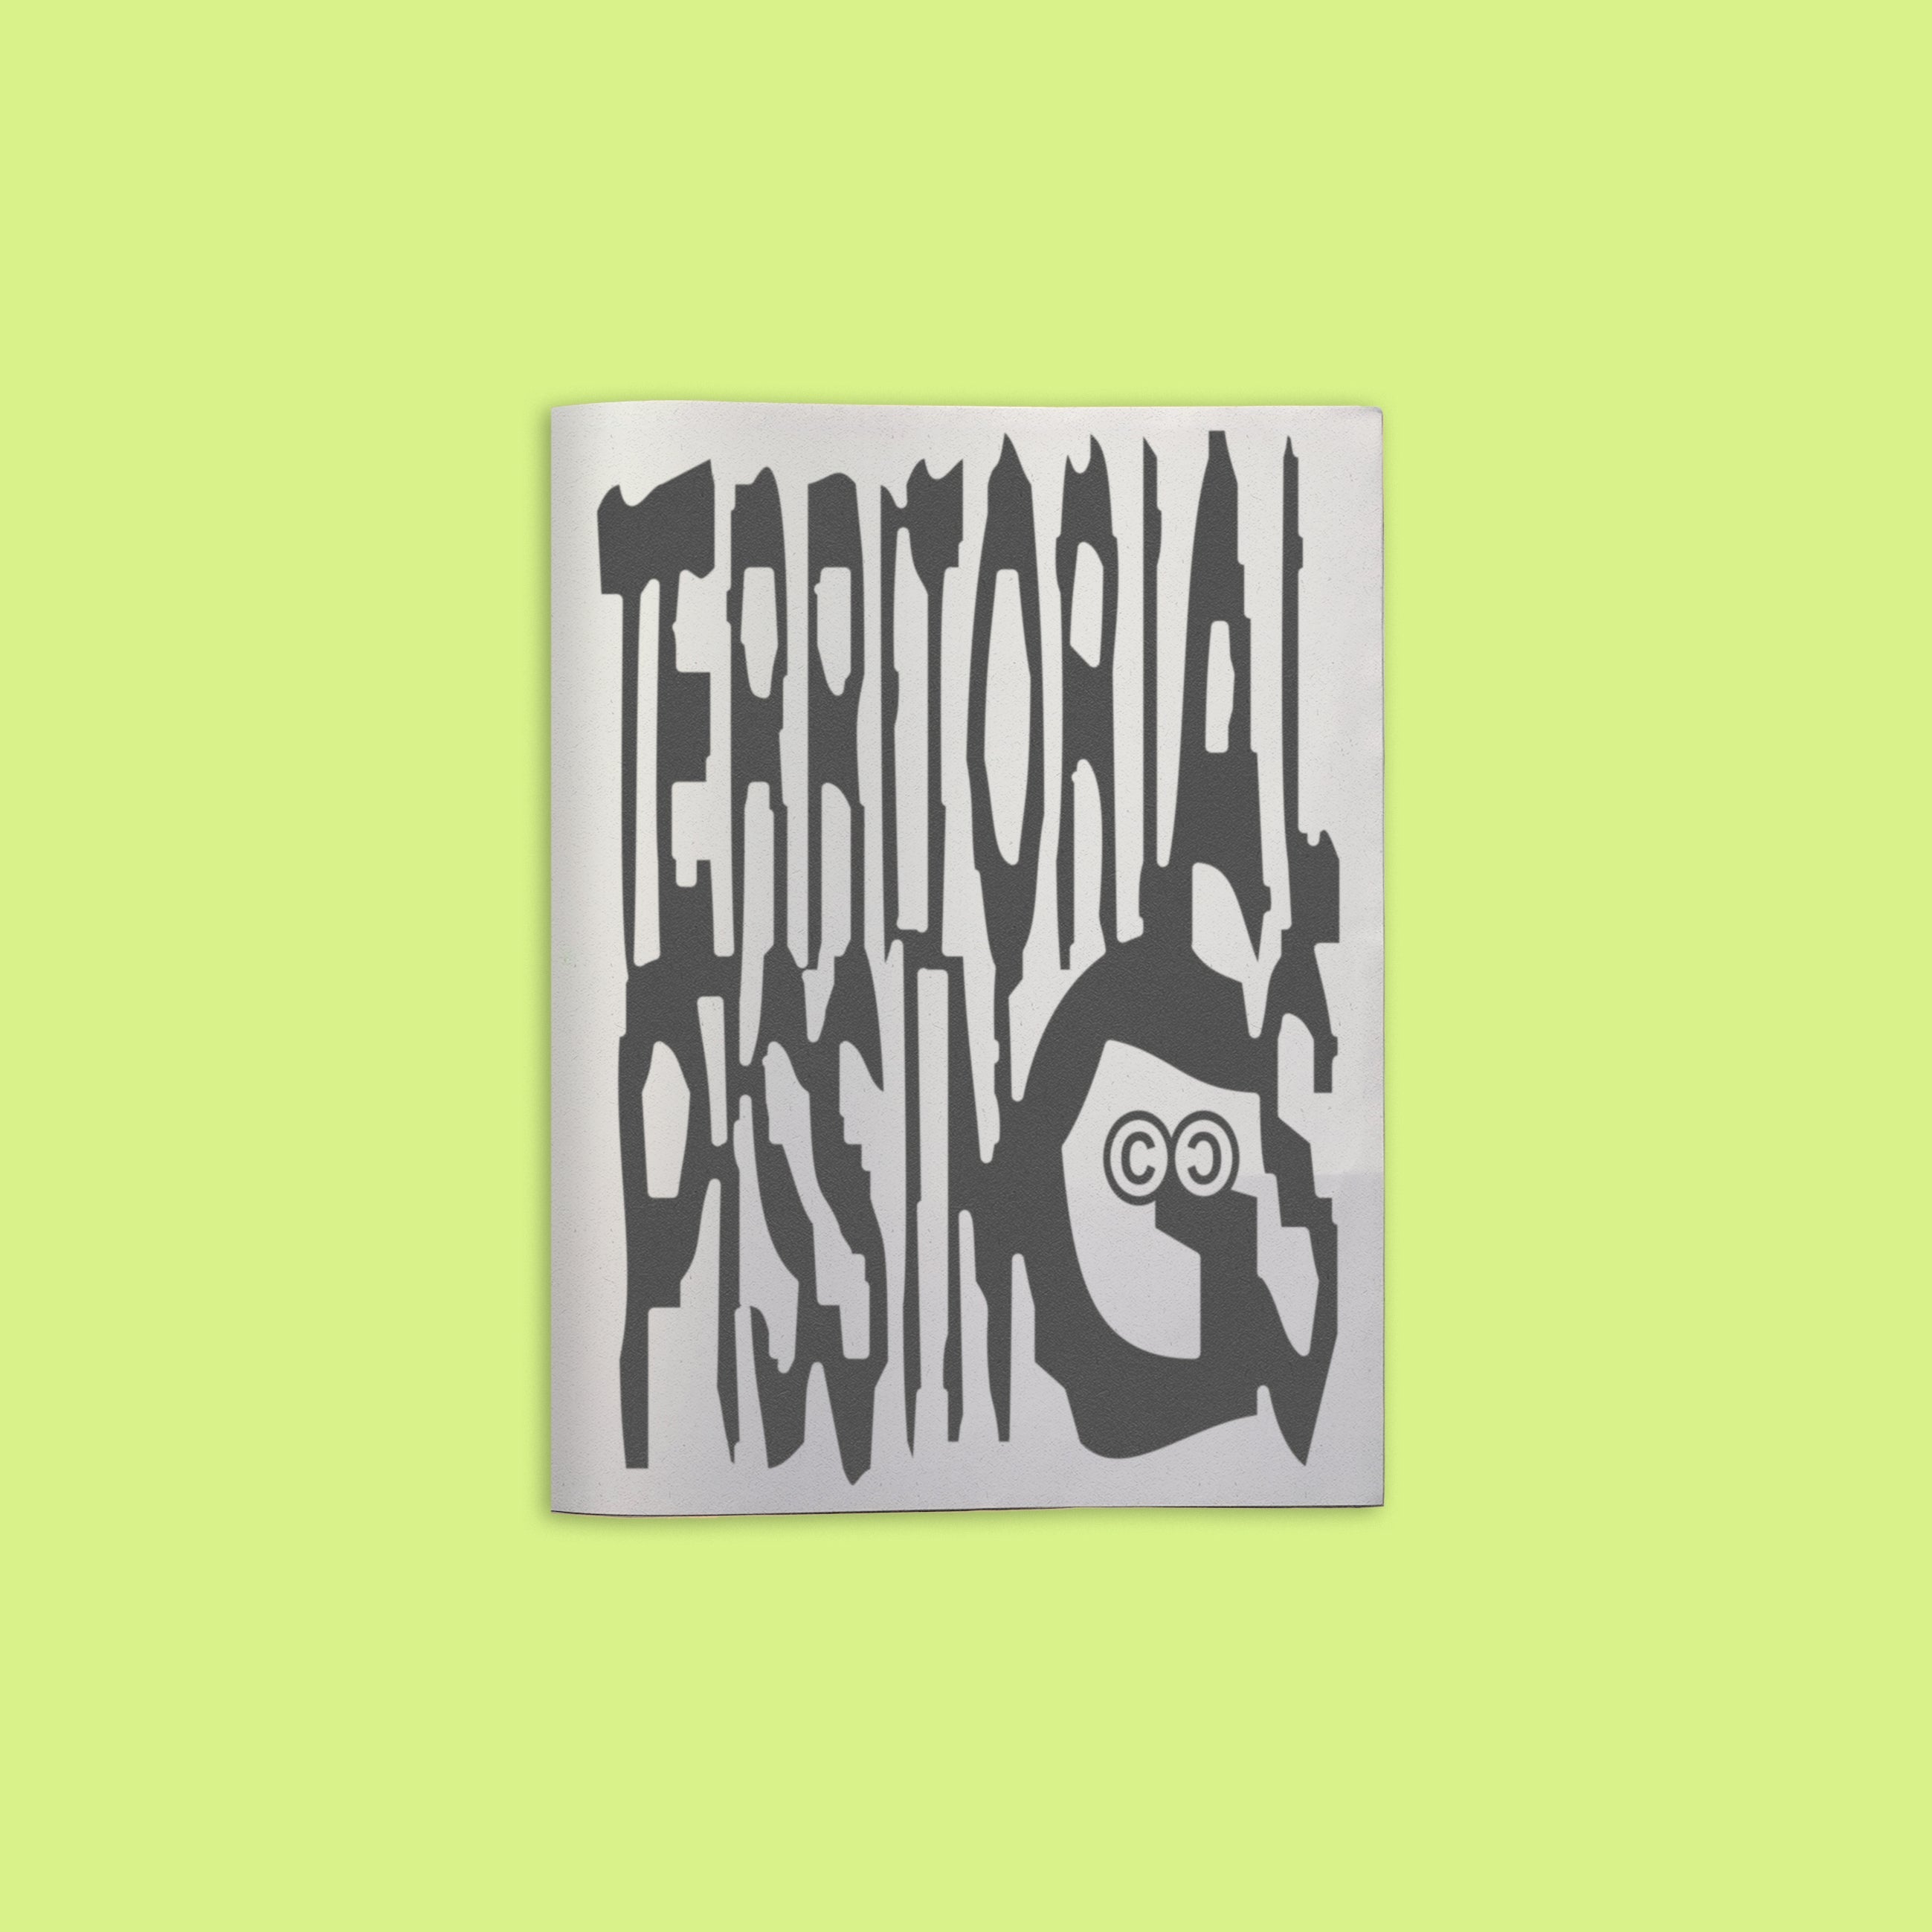 TERRITORIAL PISSING by STEWART ARMSTRONG: SHELTER BOOK CLUB - LIME